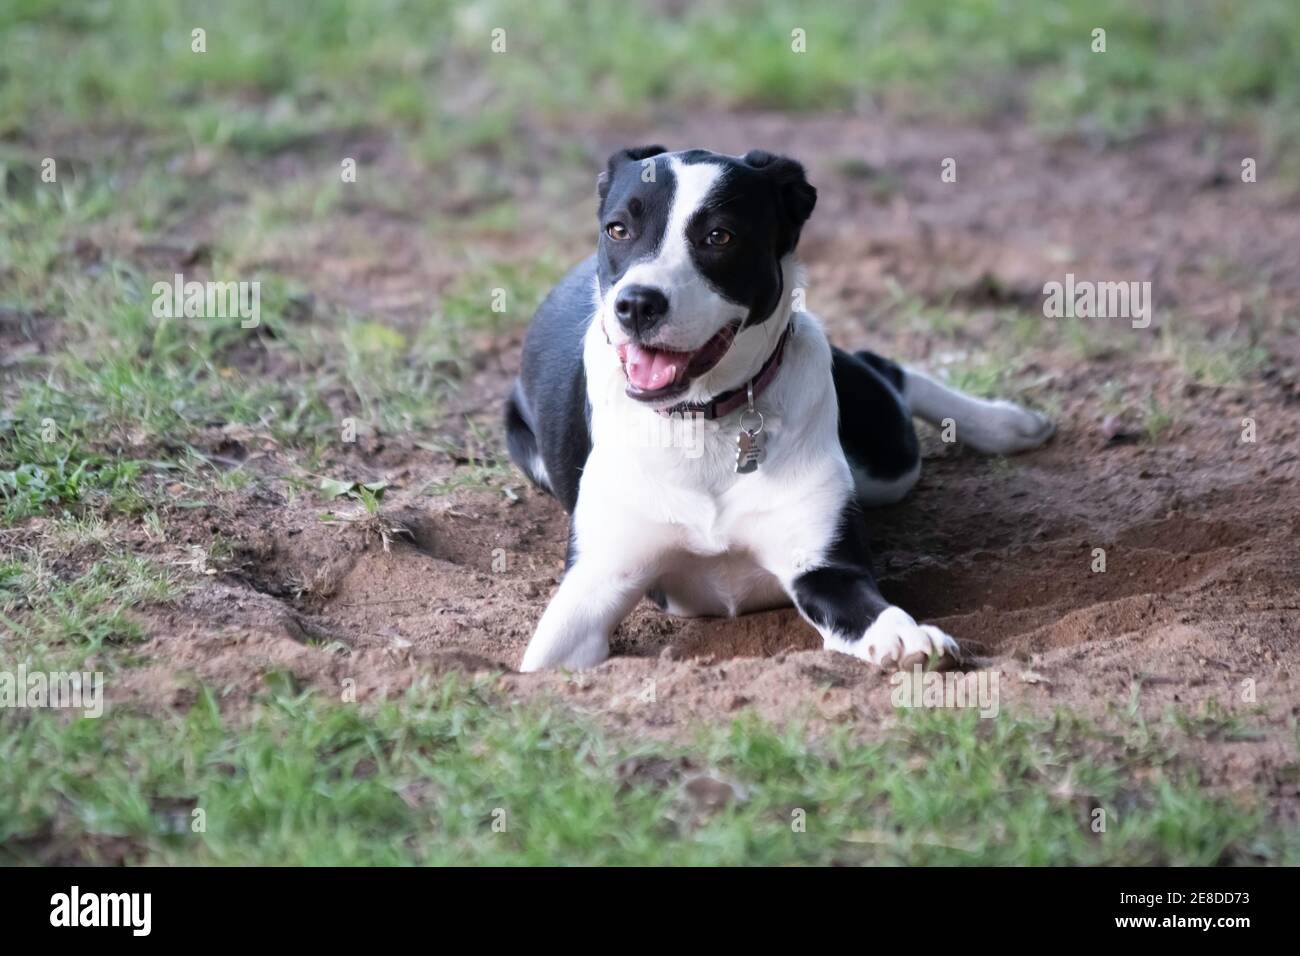 Black and white Border Collie crossbred dog  with ears pinned back looking at the camera while lying in a hole it has just dug in the yard with blurre Stock Photo